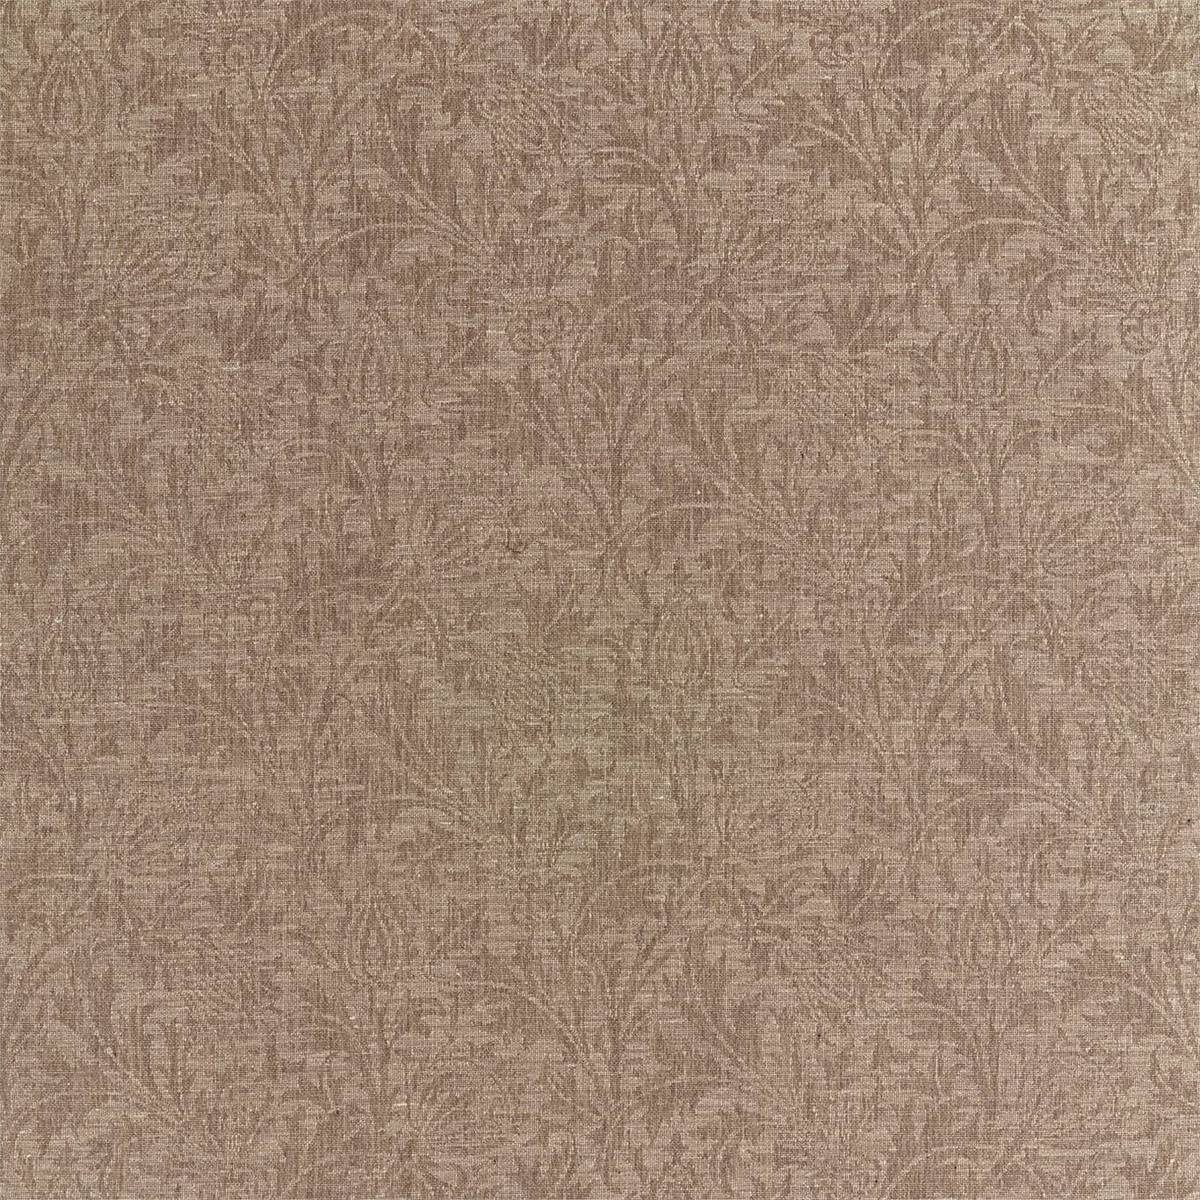 Thistle Weave Bronze Fabric by William Morris & Co.